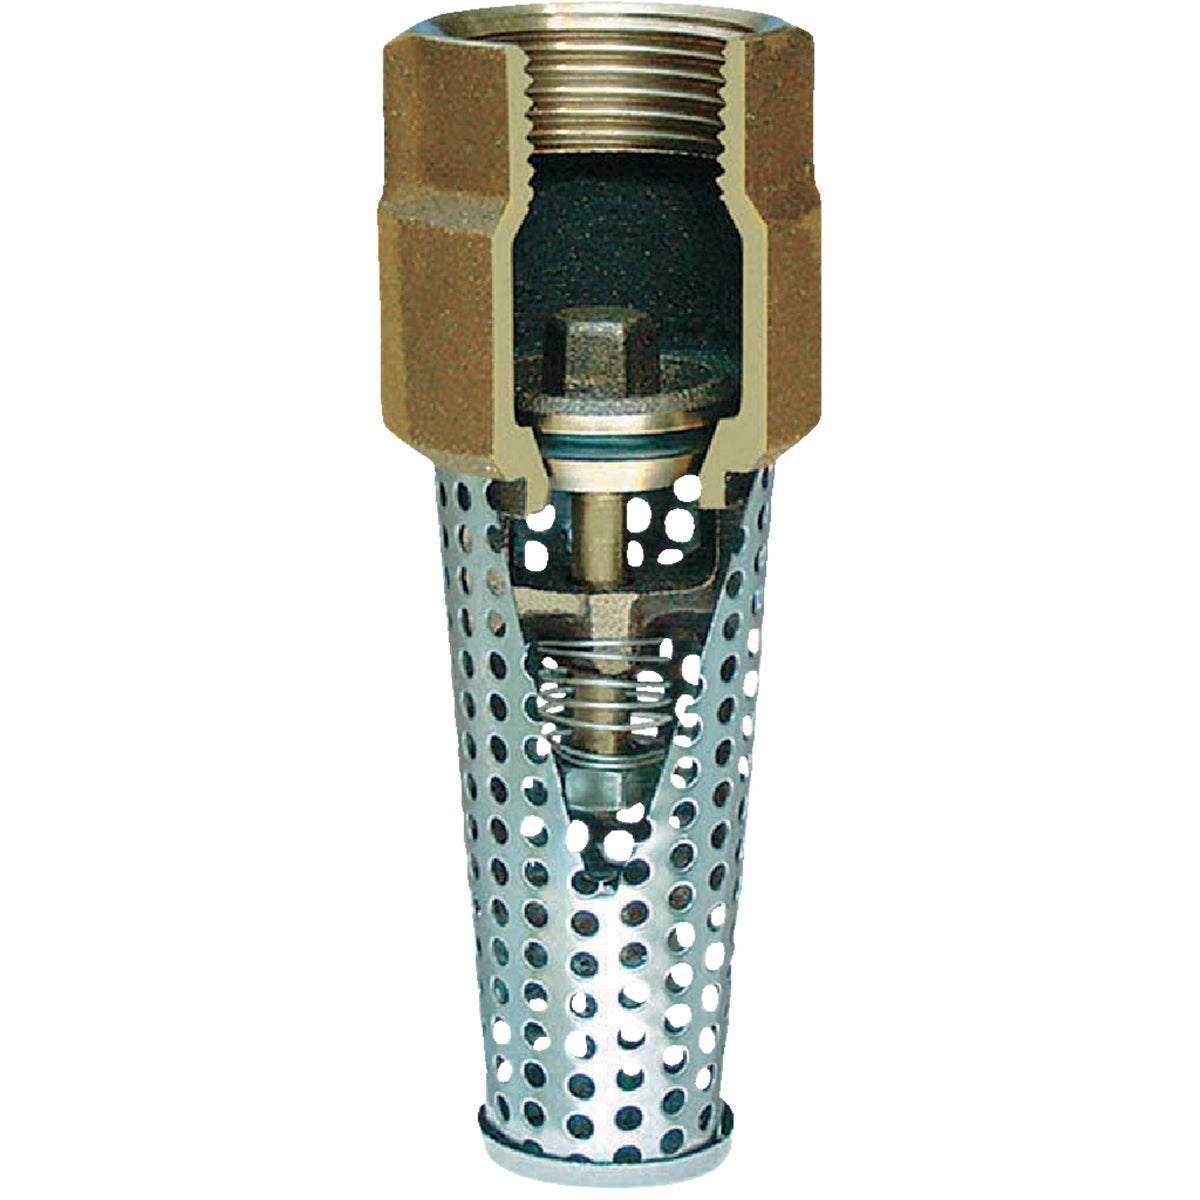 Simmons 1-1/2 In. Silicon Bronze Foot Valve, Lead Free